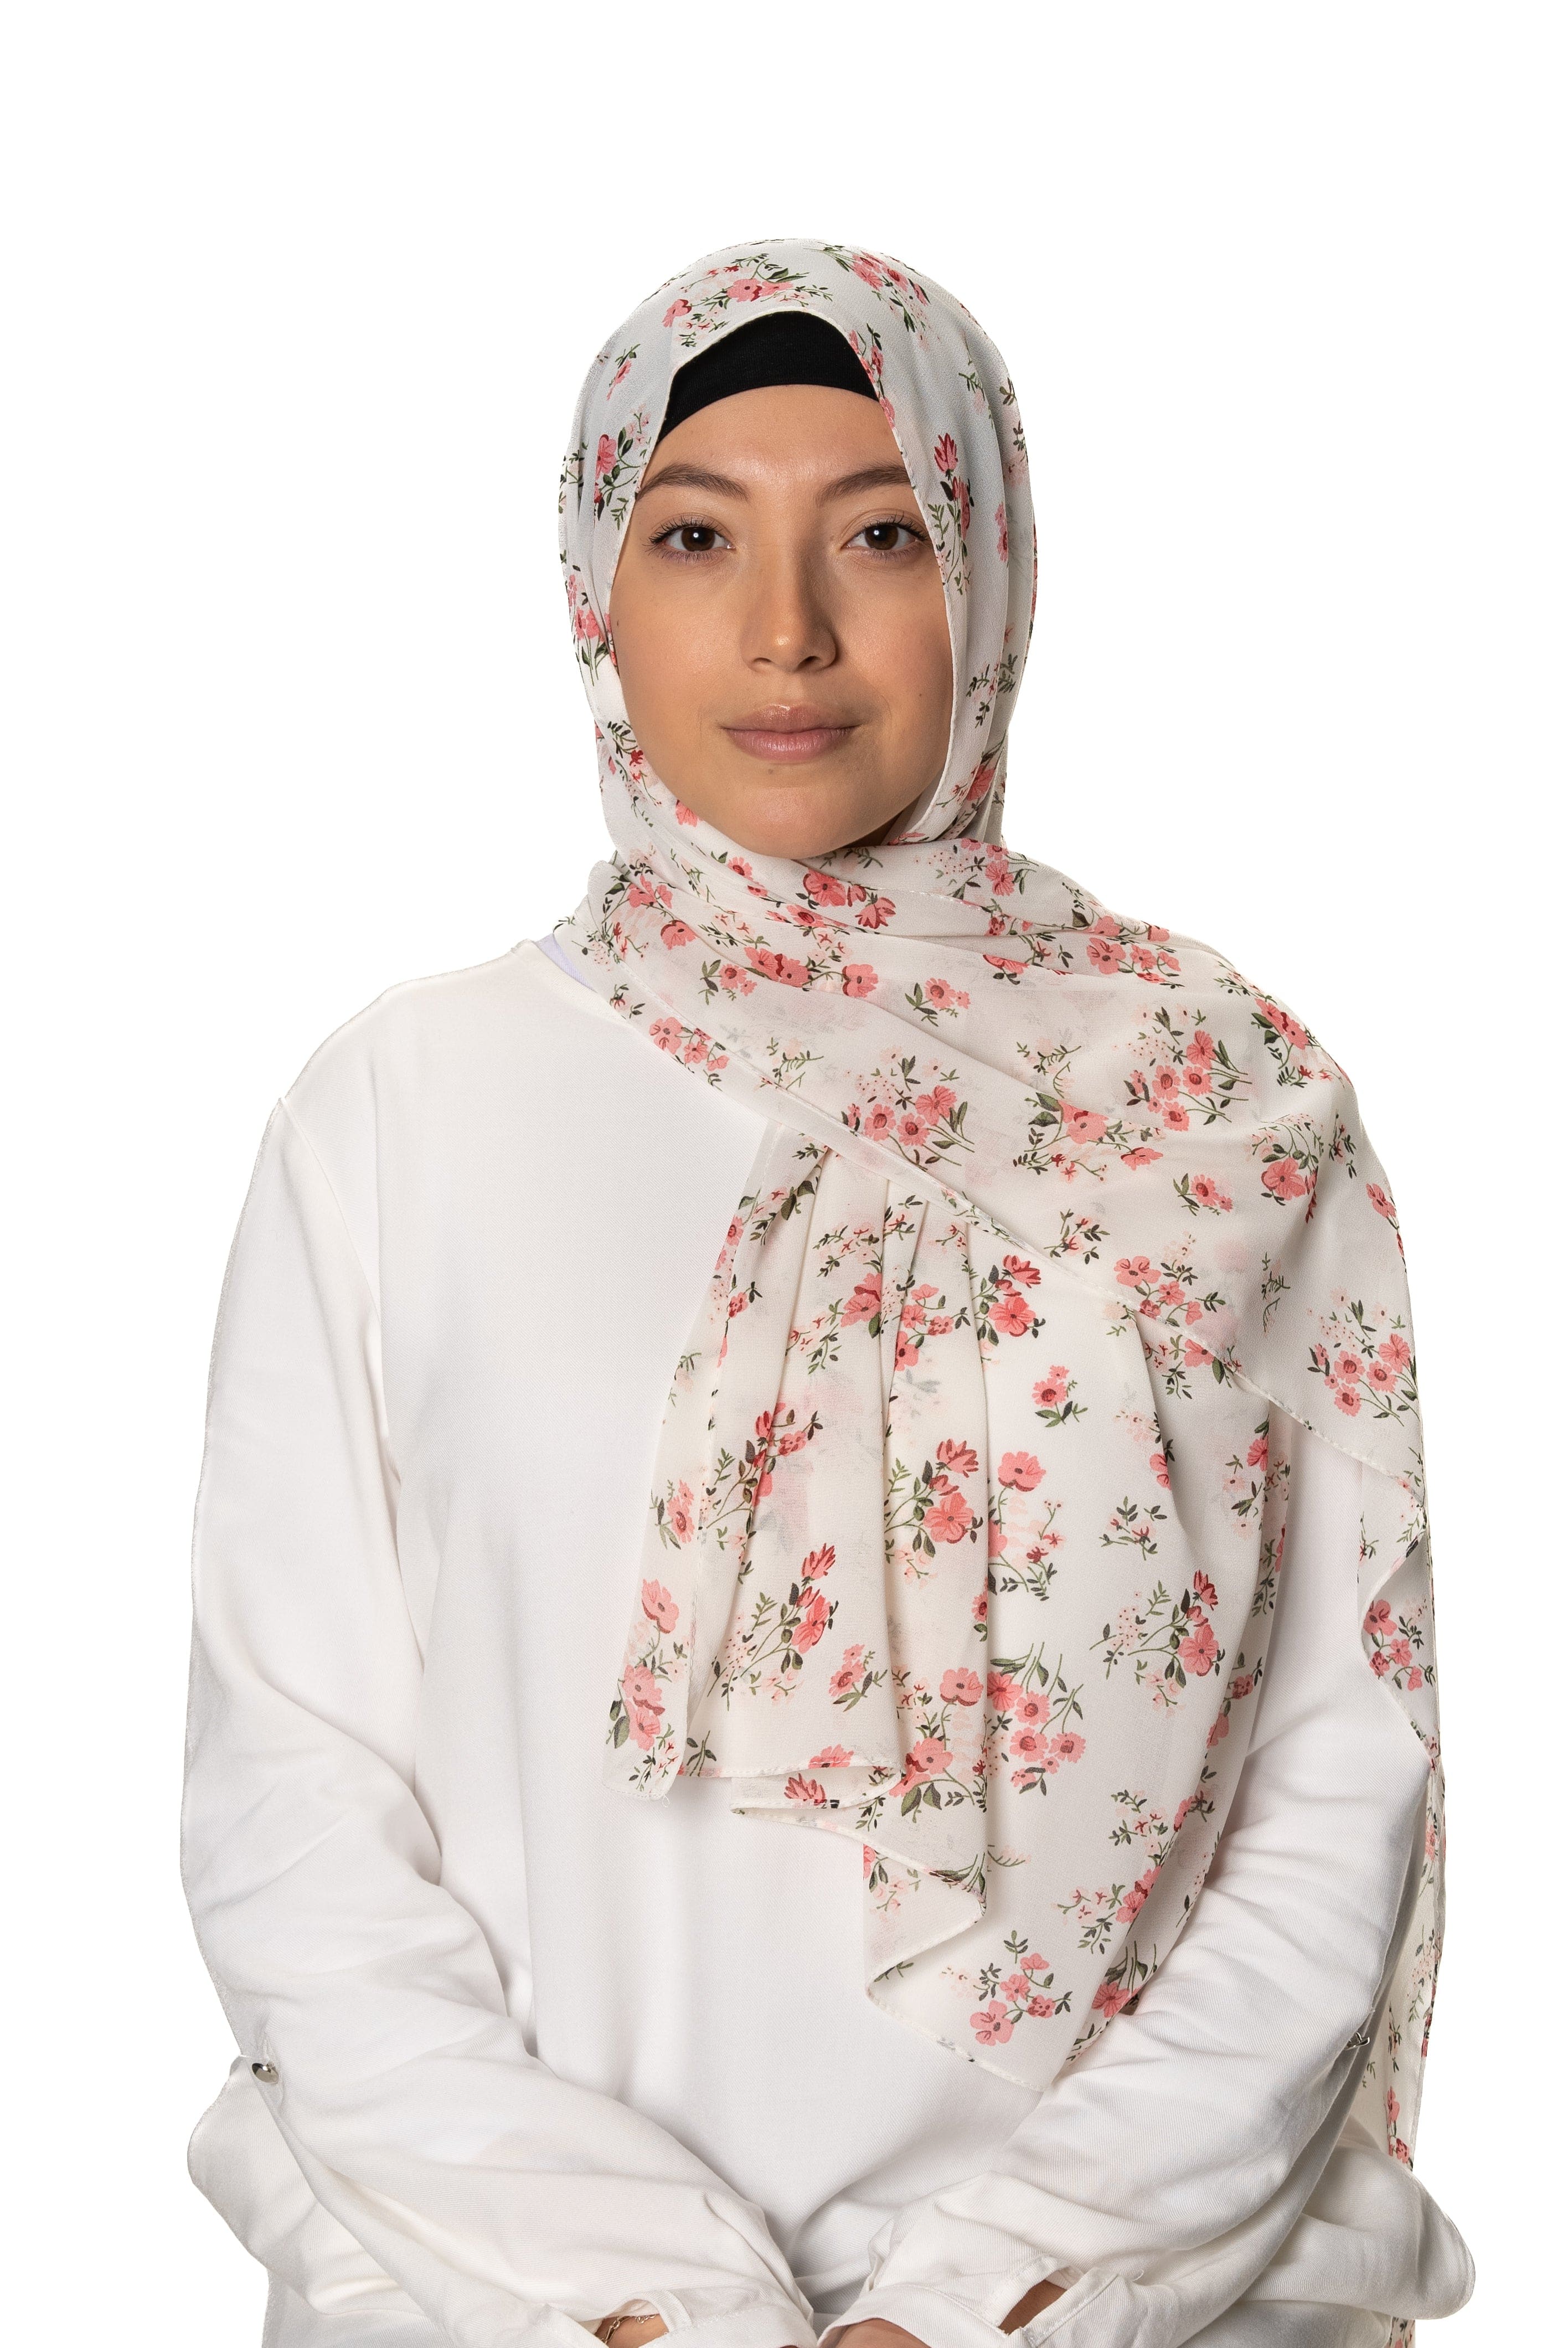 Jolie Nisa Hijab Ivory Blossom Elevate Your Style with Jolie Nisa Non-Slip Printed Chiffon Hijabs - Elegant, Comfortable, and Secure Hijabs for Women